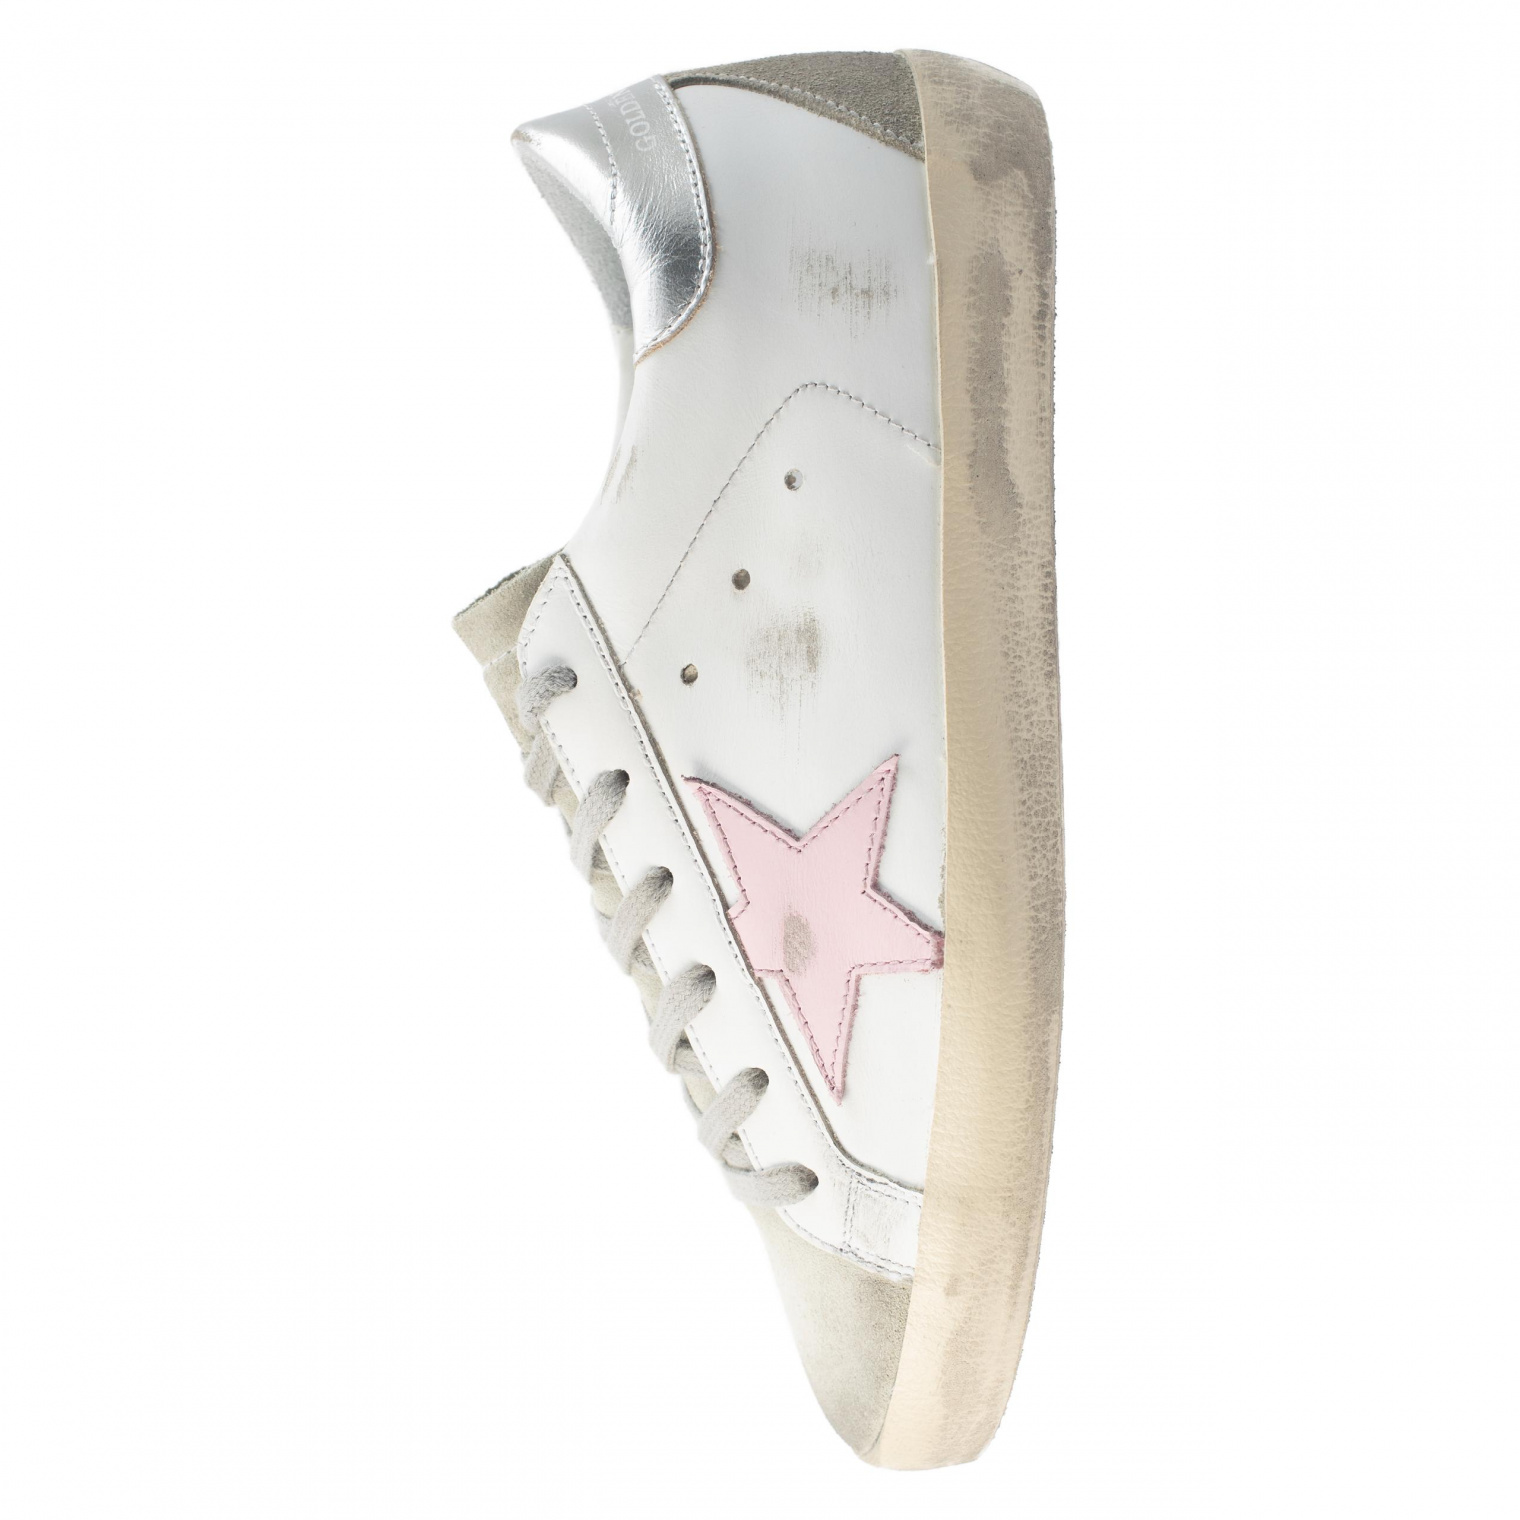 Golden Goose Superstar Leather sneakers with pink star